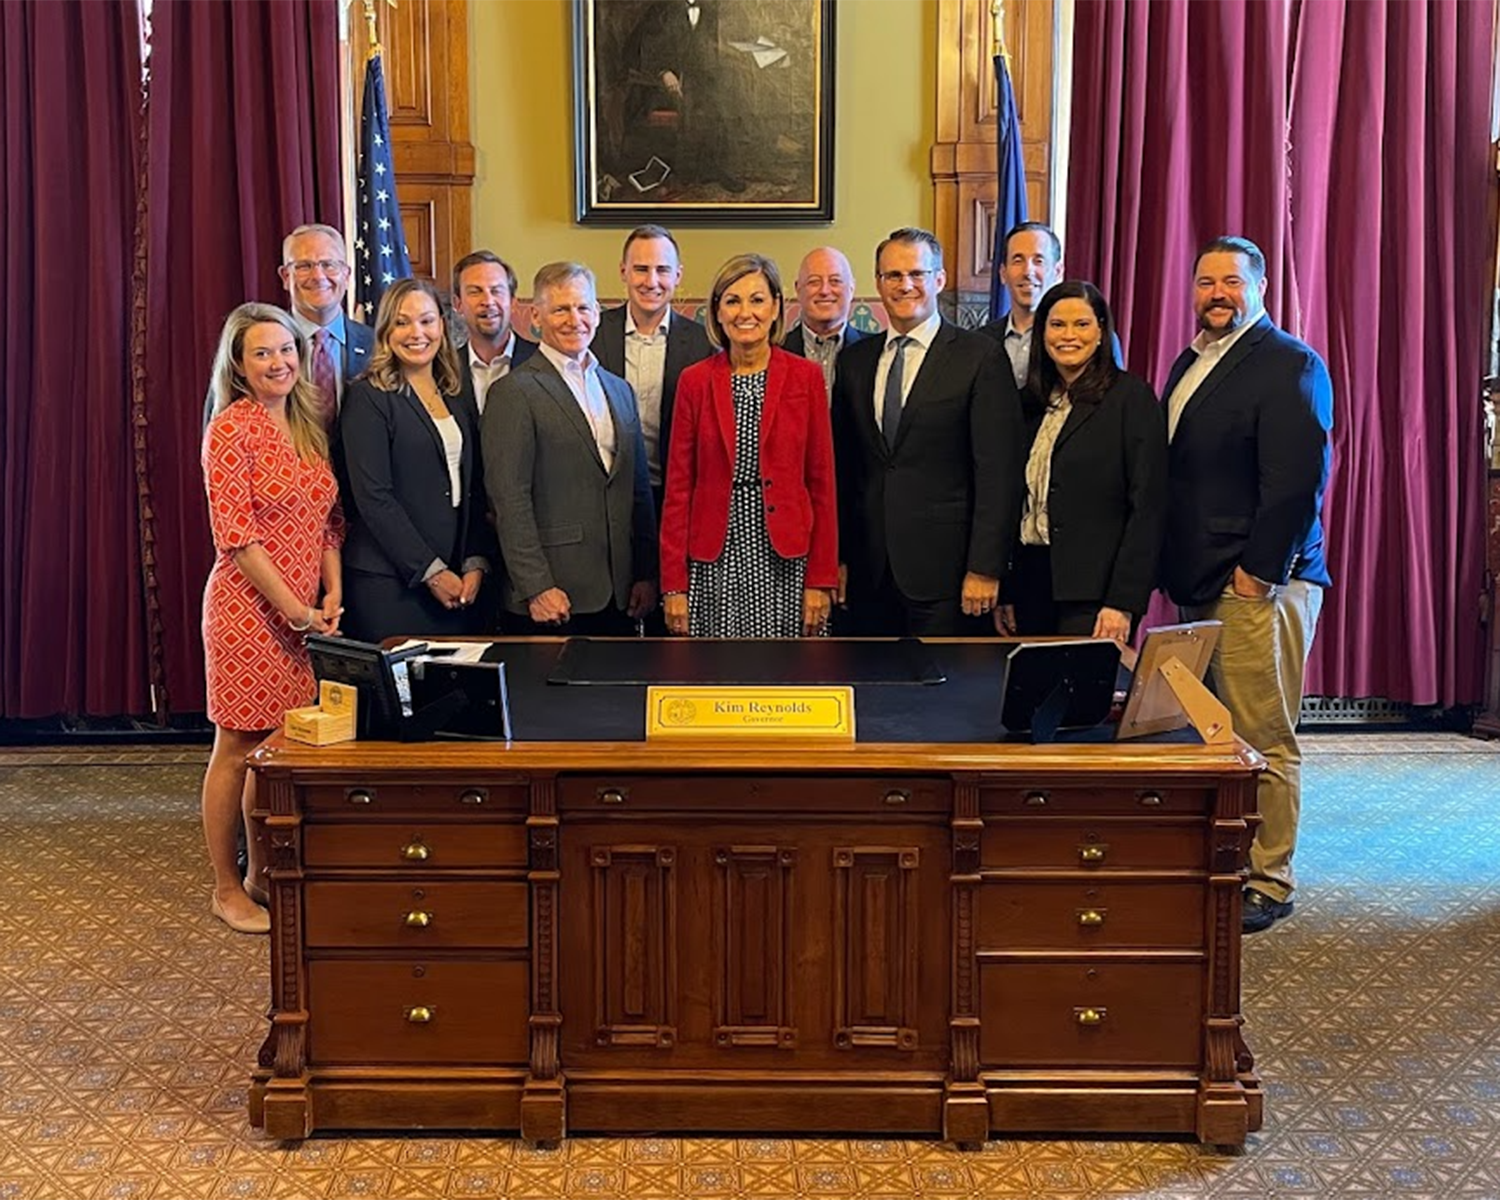 ACC Member Company Site Leaders and Representatives Participate in Iowa Chemistry Roundtable with Gov. Kim Reynolds, Des Moines, IA, July 2022